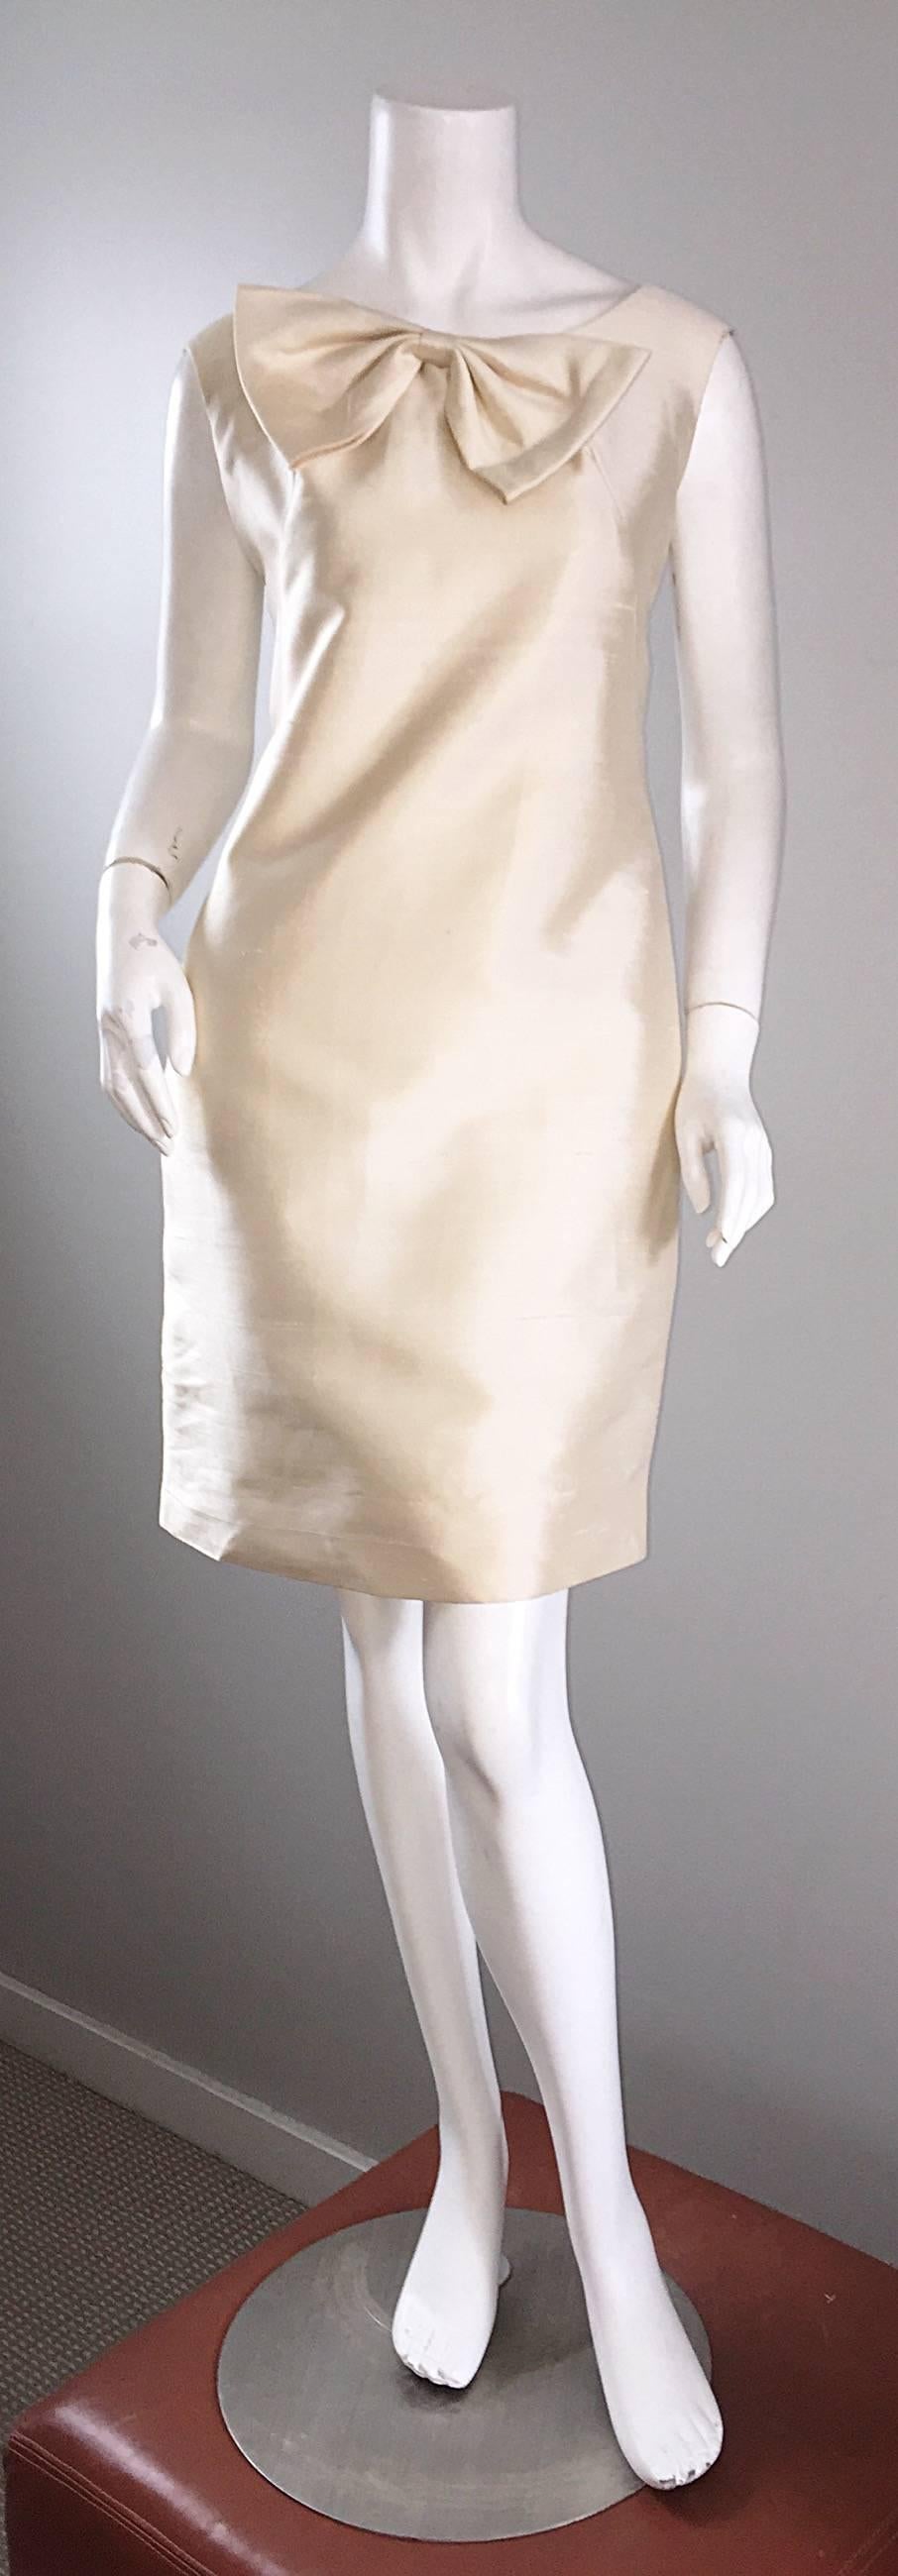 Chic 1960s Ivory Off White Raw Silk Vintage Shift Dress w/ Oversized Bow Collar 1